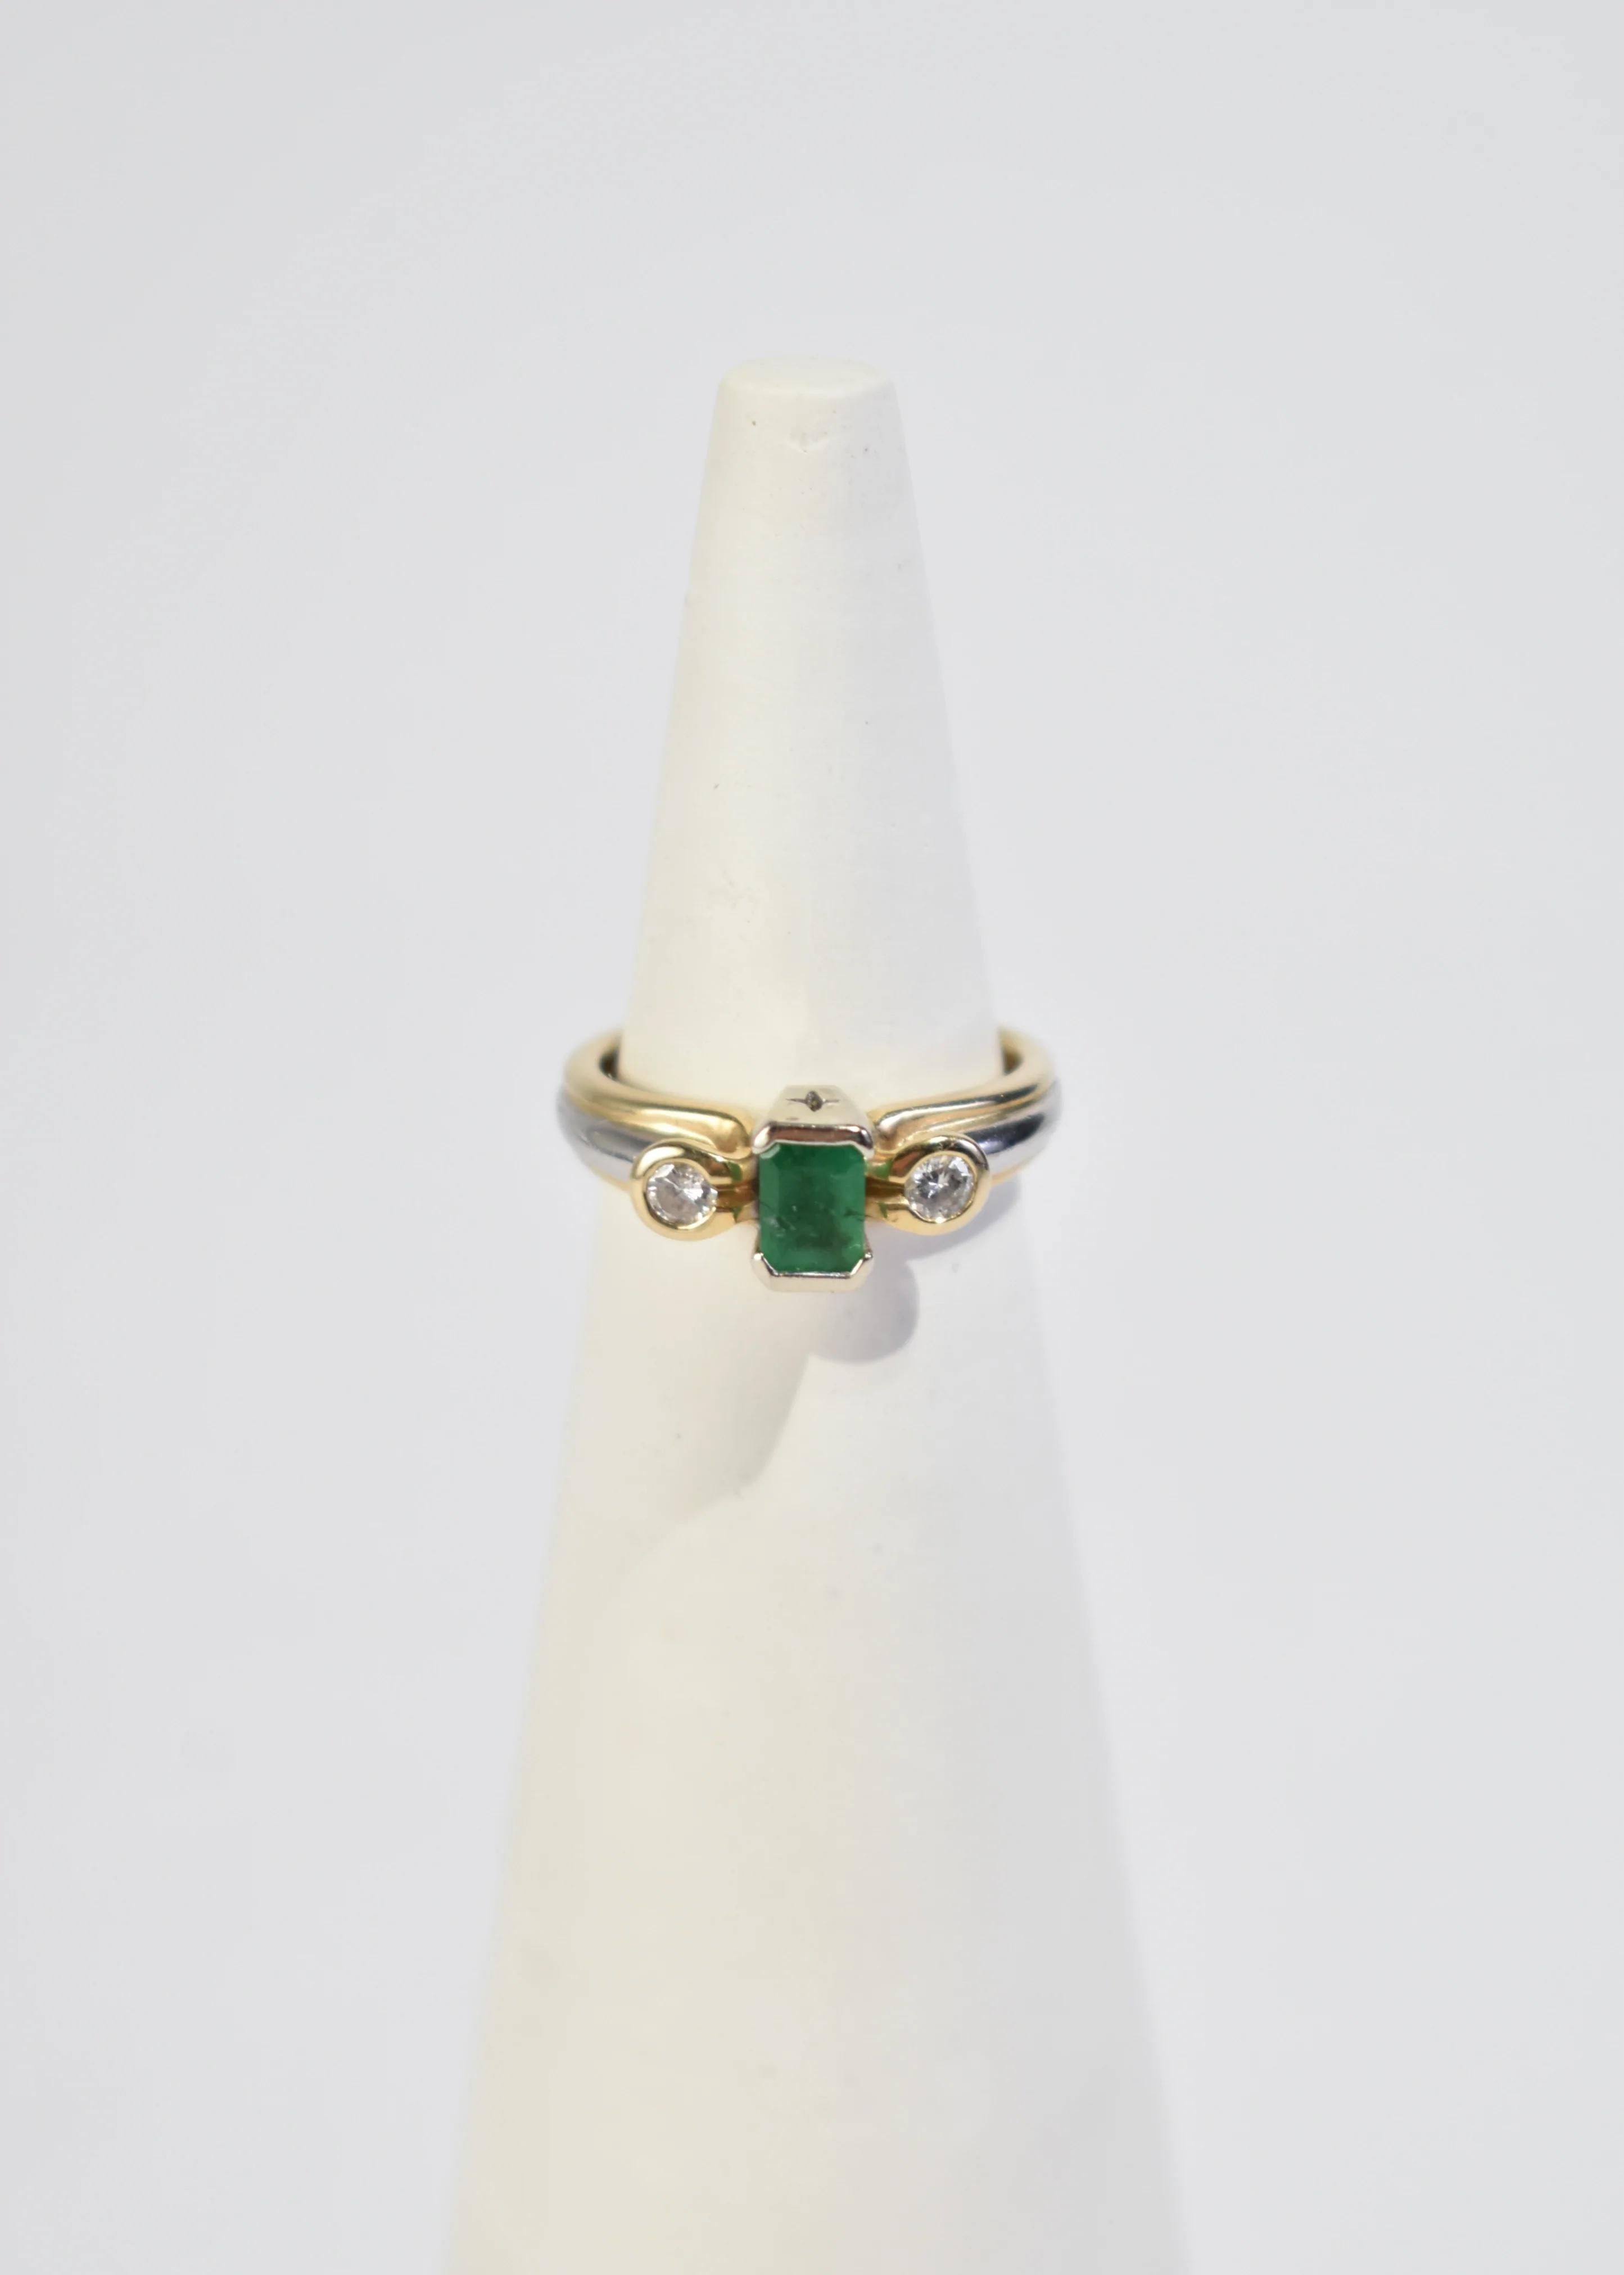 Stunning vintage gold ring with emerald and diamond stones and platinum detail. Stamped 14k.

Material: 14k gold, platinum, diamond, emerald.